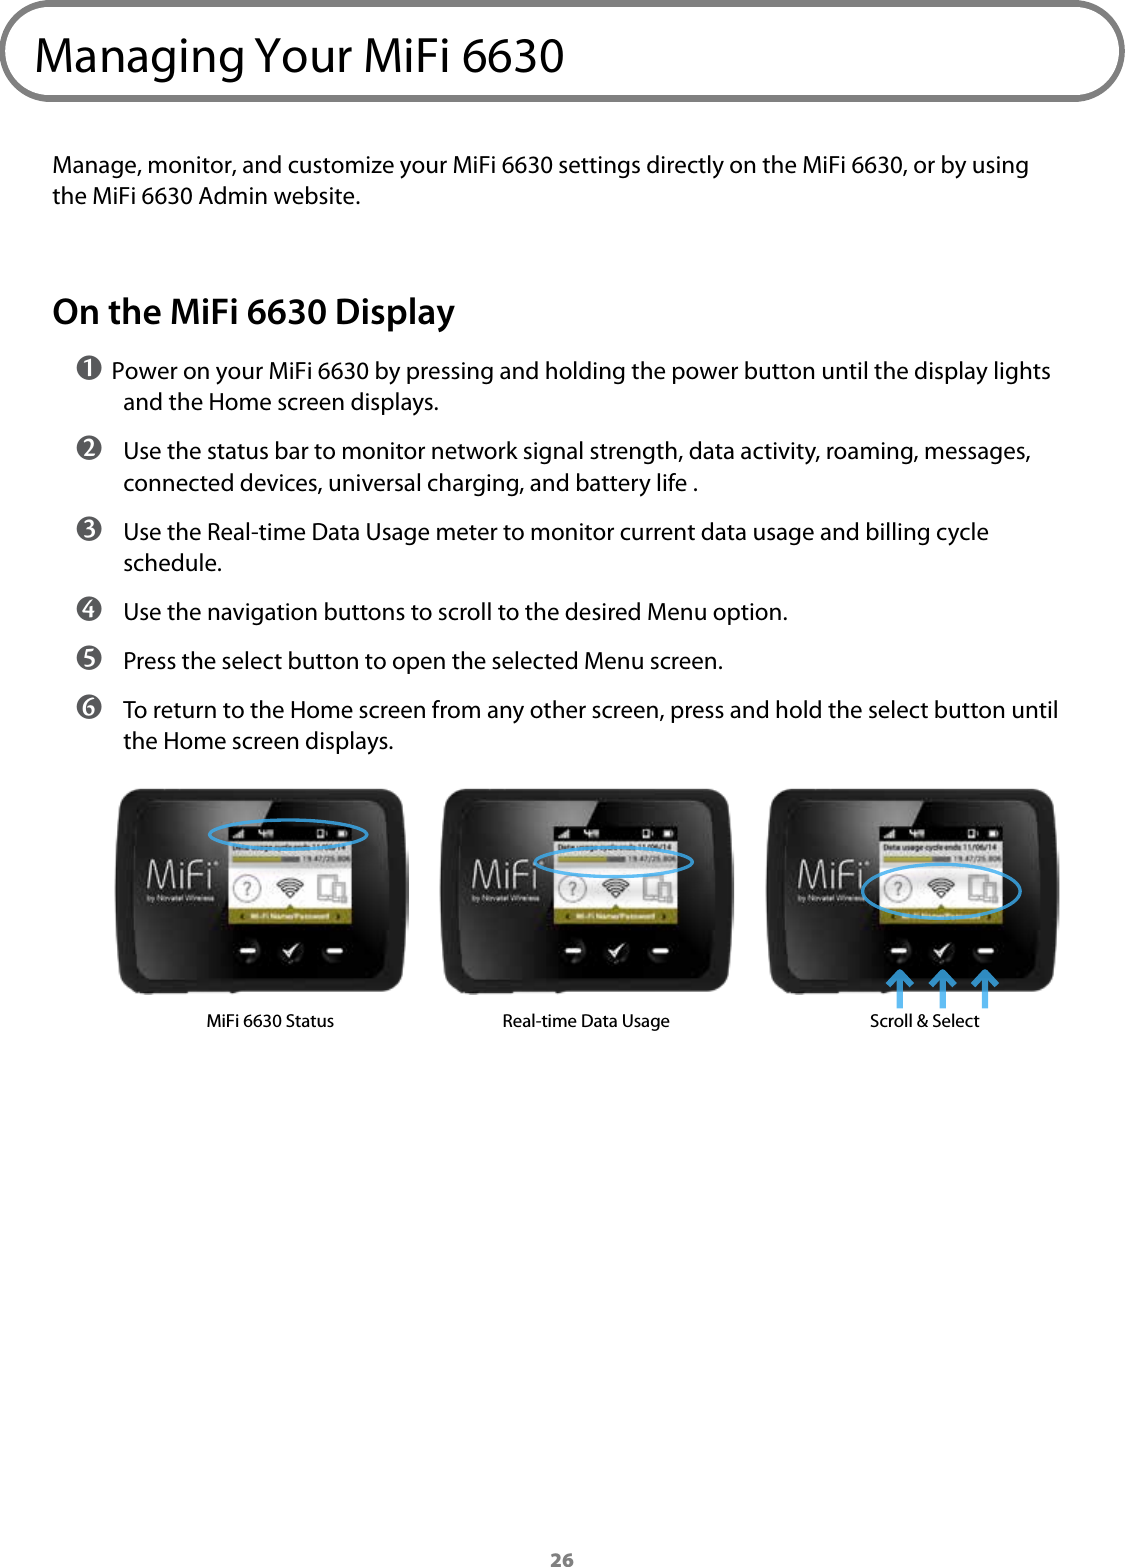 26Managing Your MiFi 6630Manage, monitor, and customize your MiFi 6630 settings directly on the MiFi 6630, or by using the MiFi 6630 Admin website.On the MiFi 6630 Display➊ Power on your MiFi 6630 by pressing and holding the power button until the display lights and the Home screen displays. ➋ Use the status bar to monitor network signal strength, data activity, roaming, messages, connected devices, universal charging, and battery life . ➌ Use the Real-time Data Usage meter to monitor current data usage and billing cycle schedule.  ➍ Use the navigation buttons to scroll to the desired Menu option. ➎ Press the select button to open the selected Menu screen. ➏ To return to the Home screen from any other screen, press and hold the select button until the Home screen displays.MiFi 6630 Status Real-time Data Usage Scroll &amp; Select 